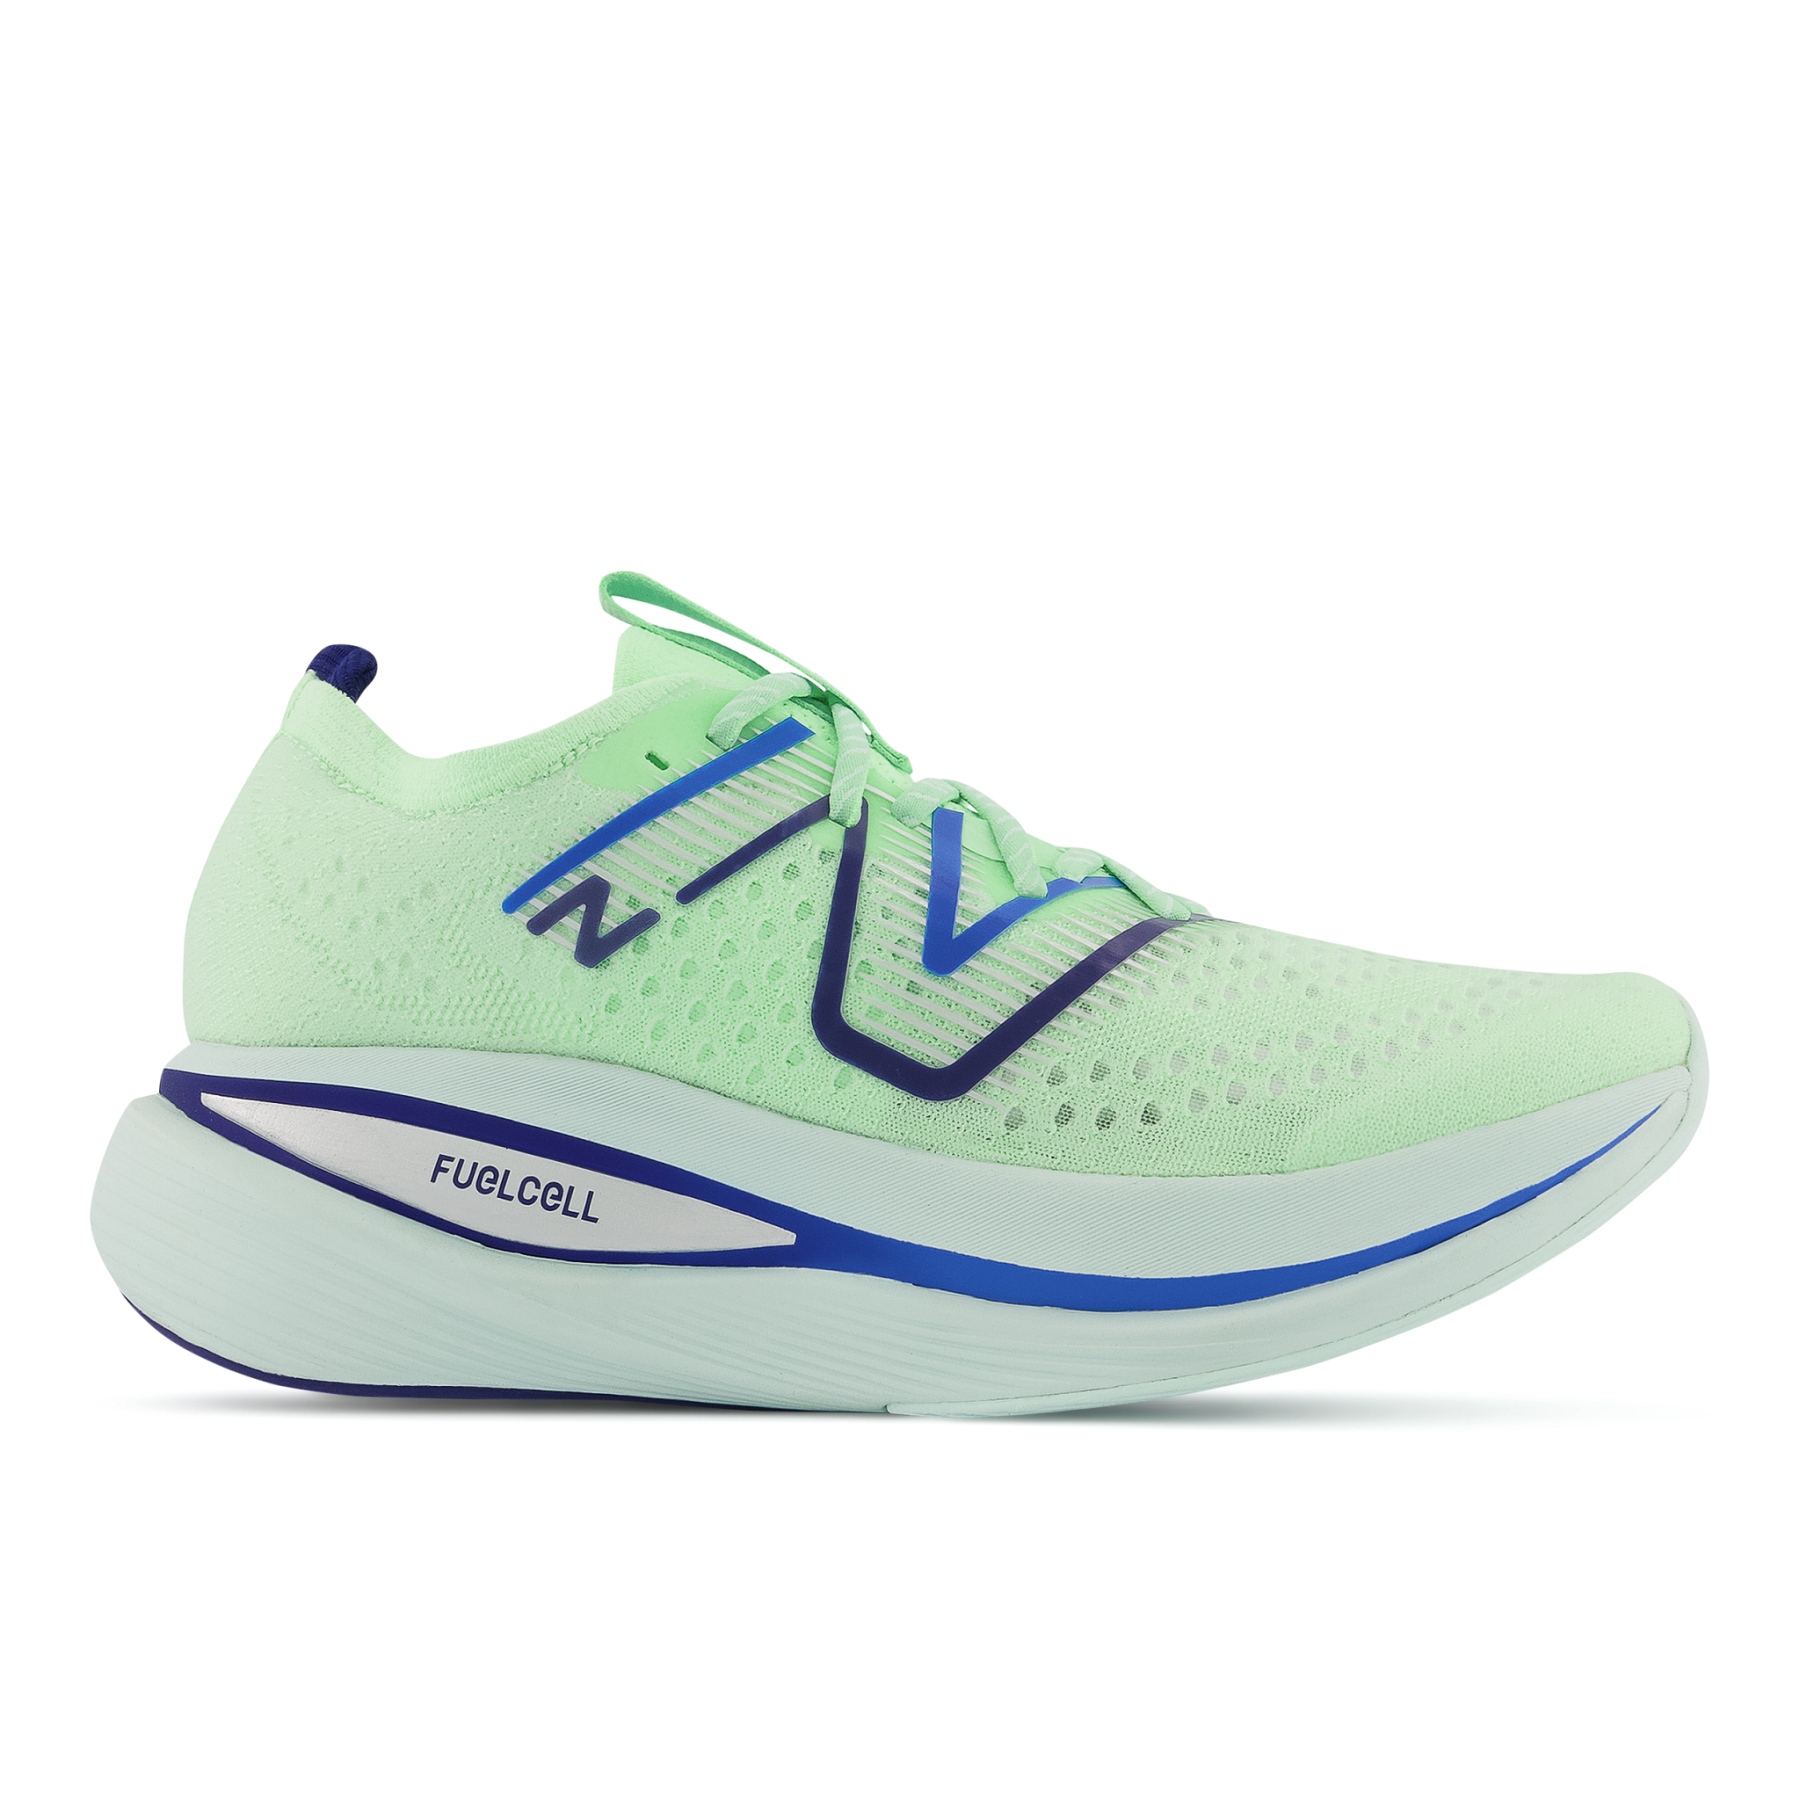 Productfoto van New Balance FuelCell Supercomp Trainer v1 Running Shoes - Blue